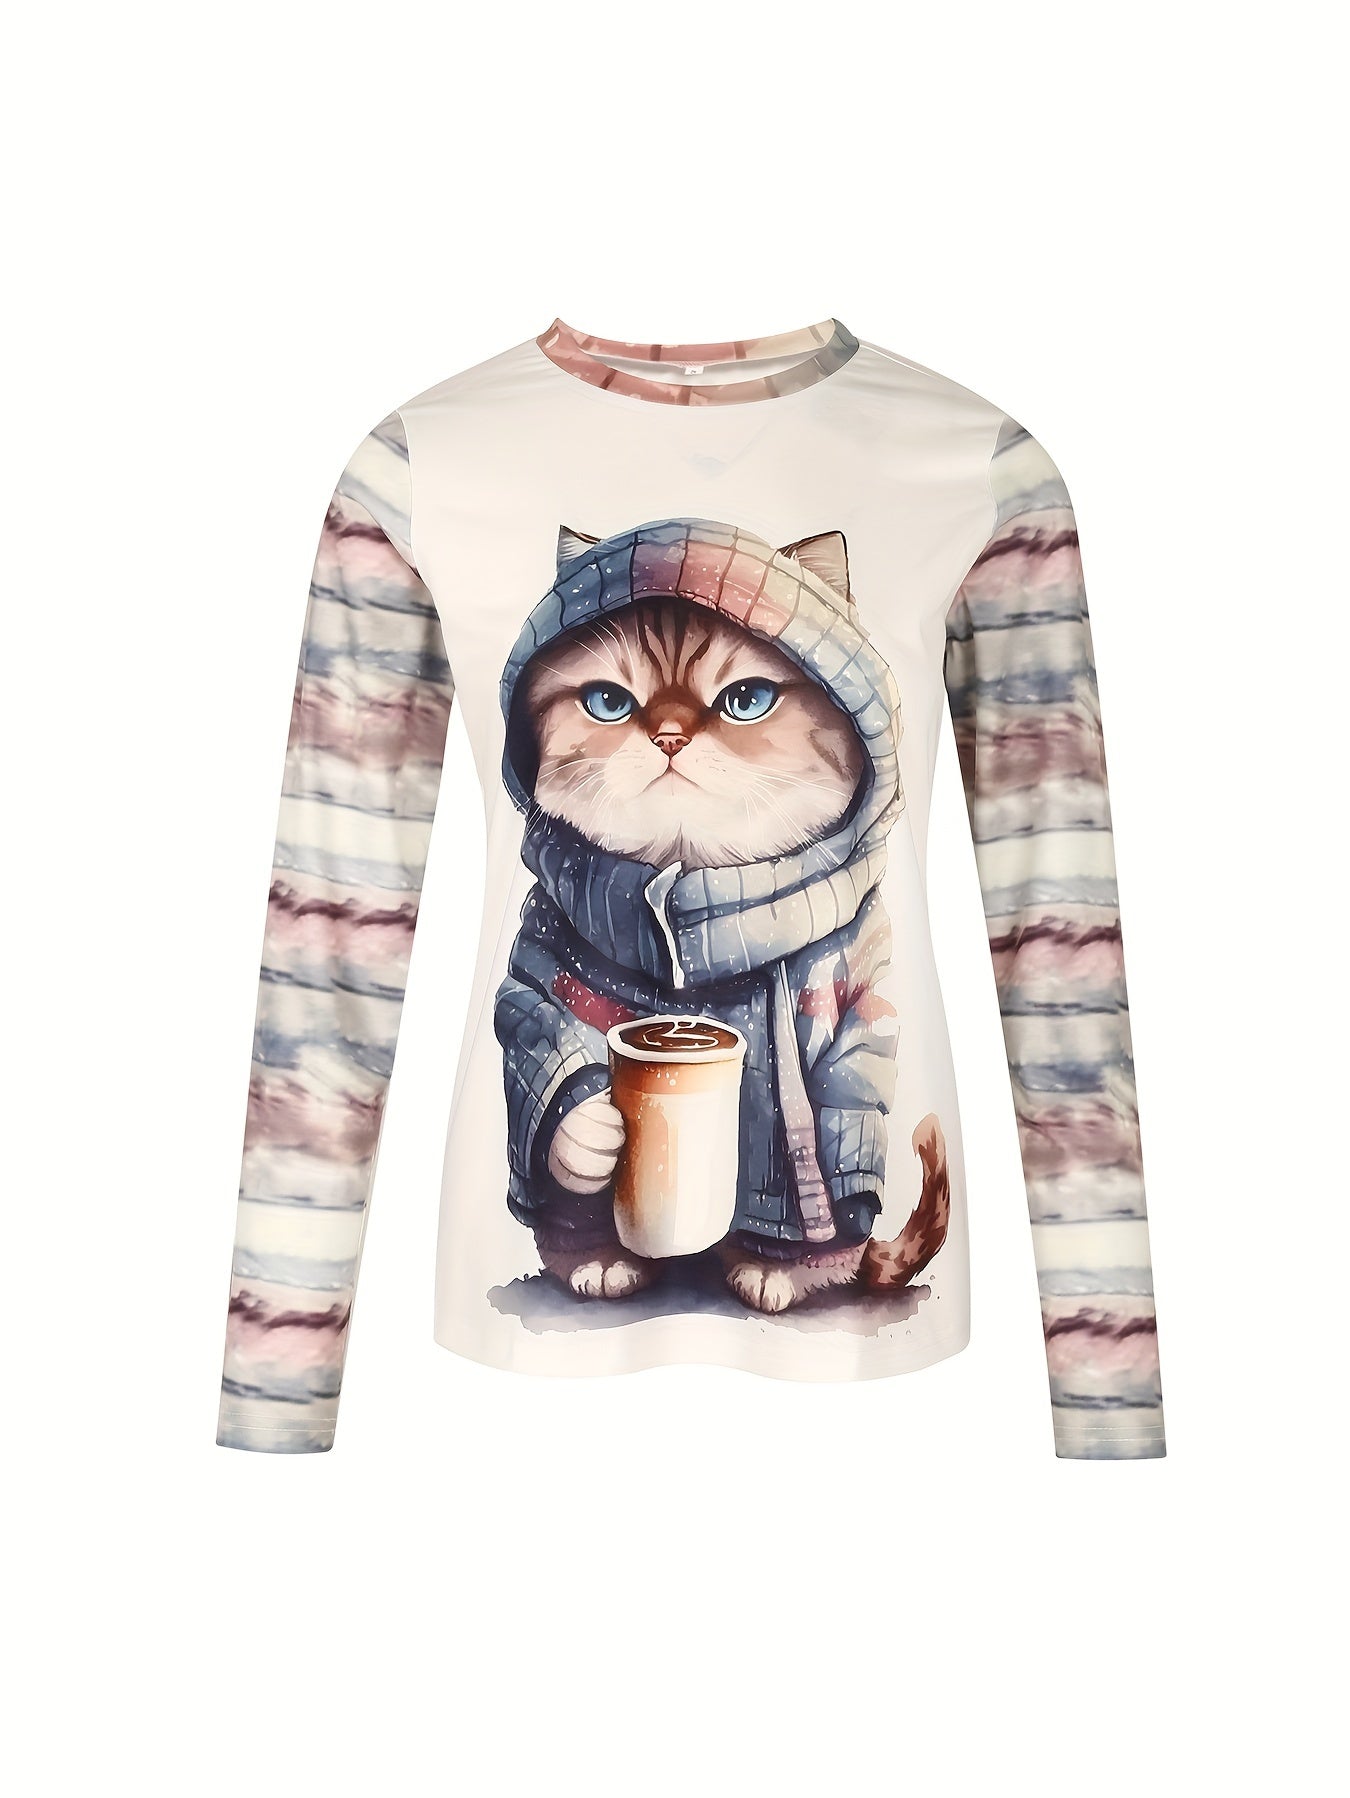 Cat Print Crew Neck T-shirt, Causal Long Sleeve Top For Spring & Fall, Women's Clothing